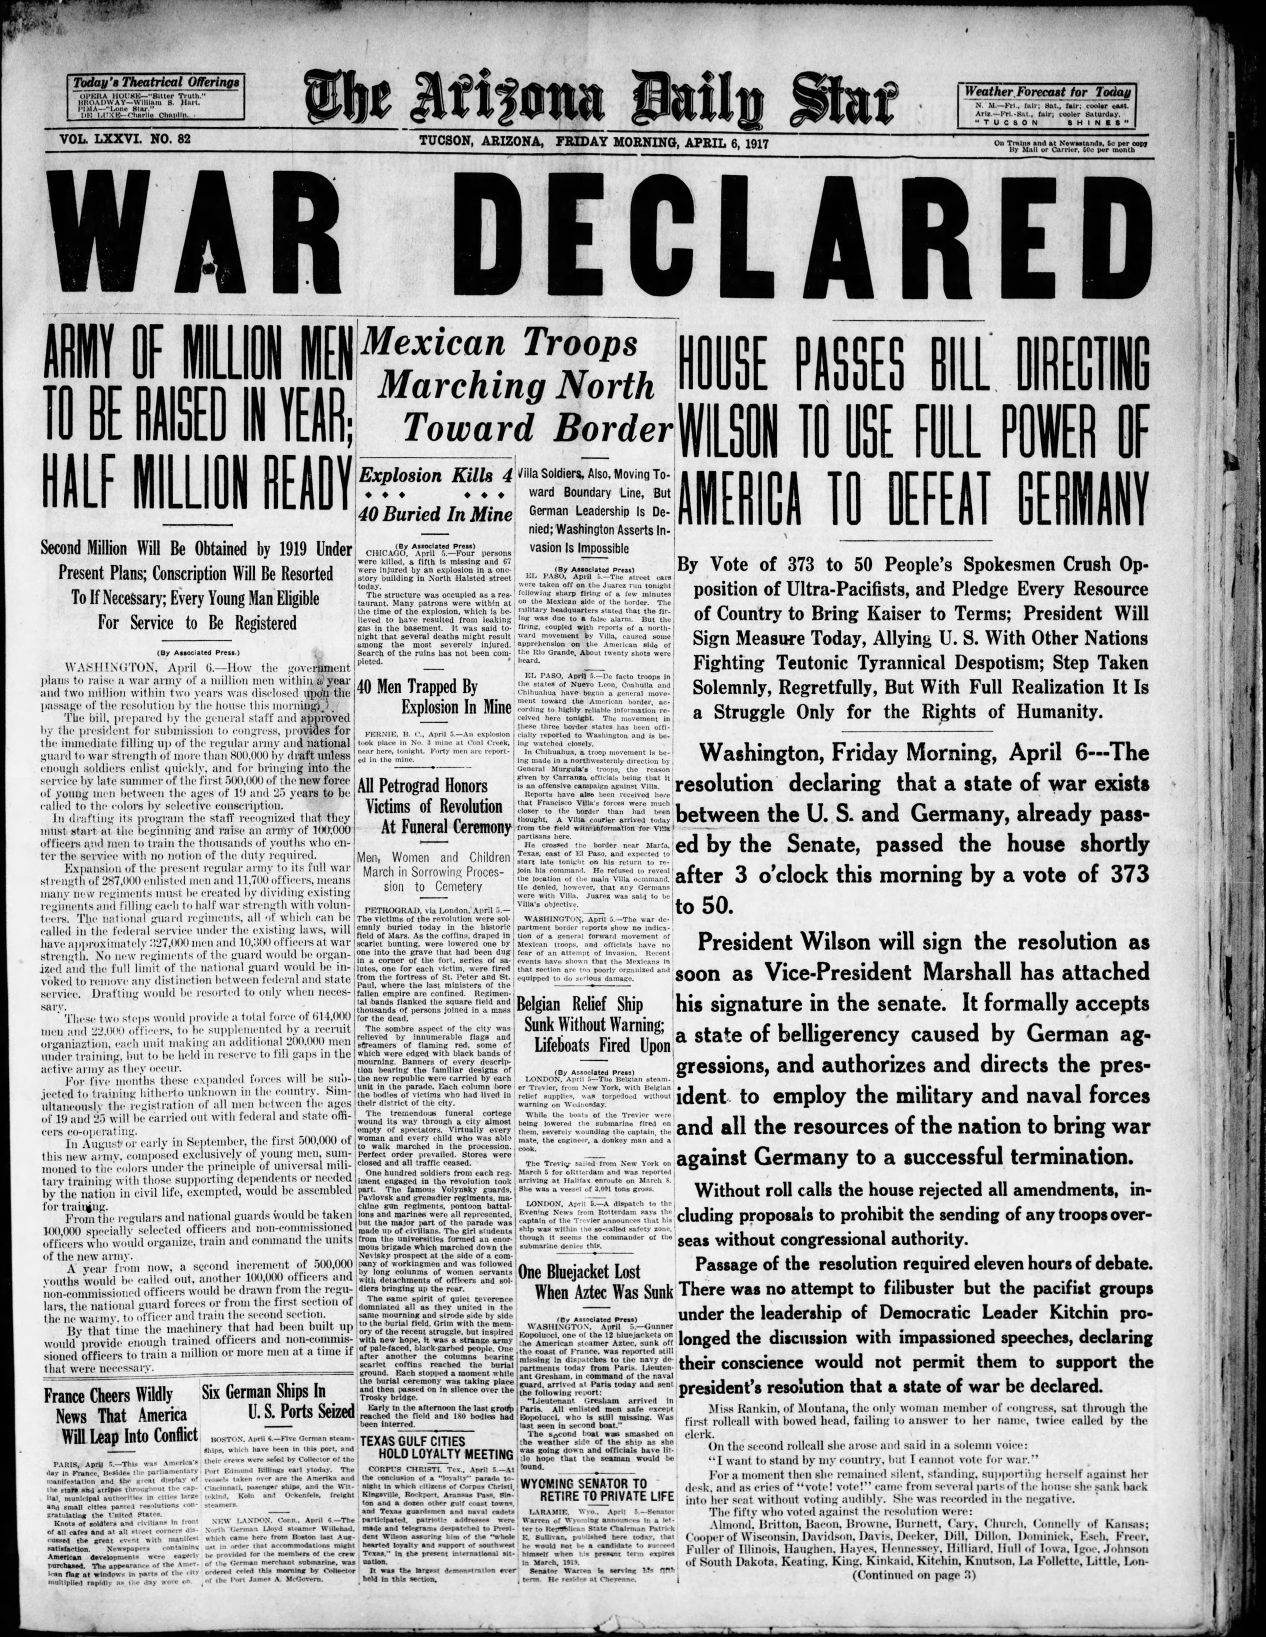 Arizona Daily Star front page April 6, 1917